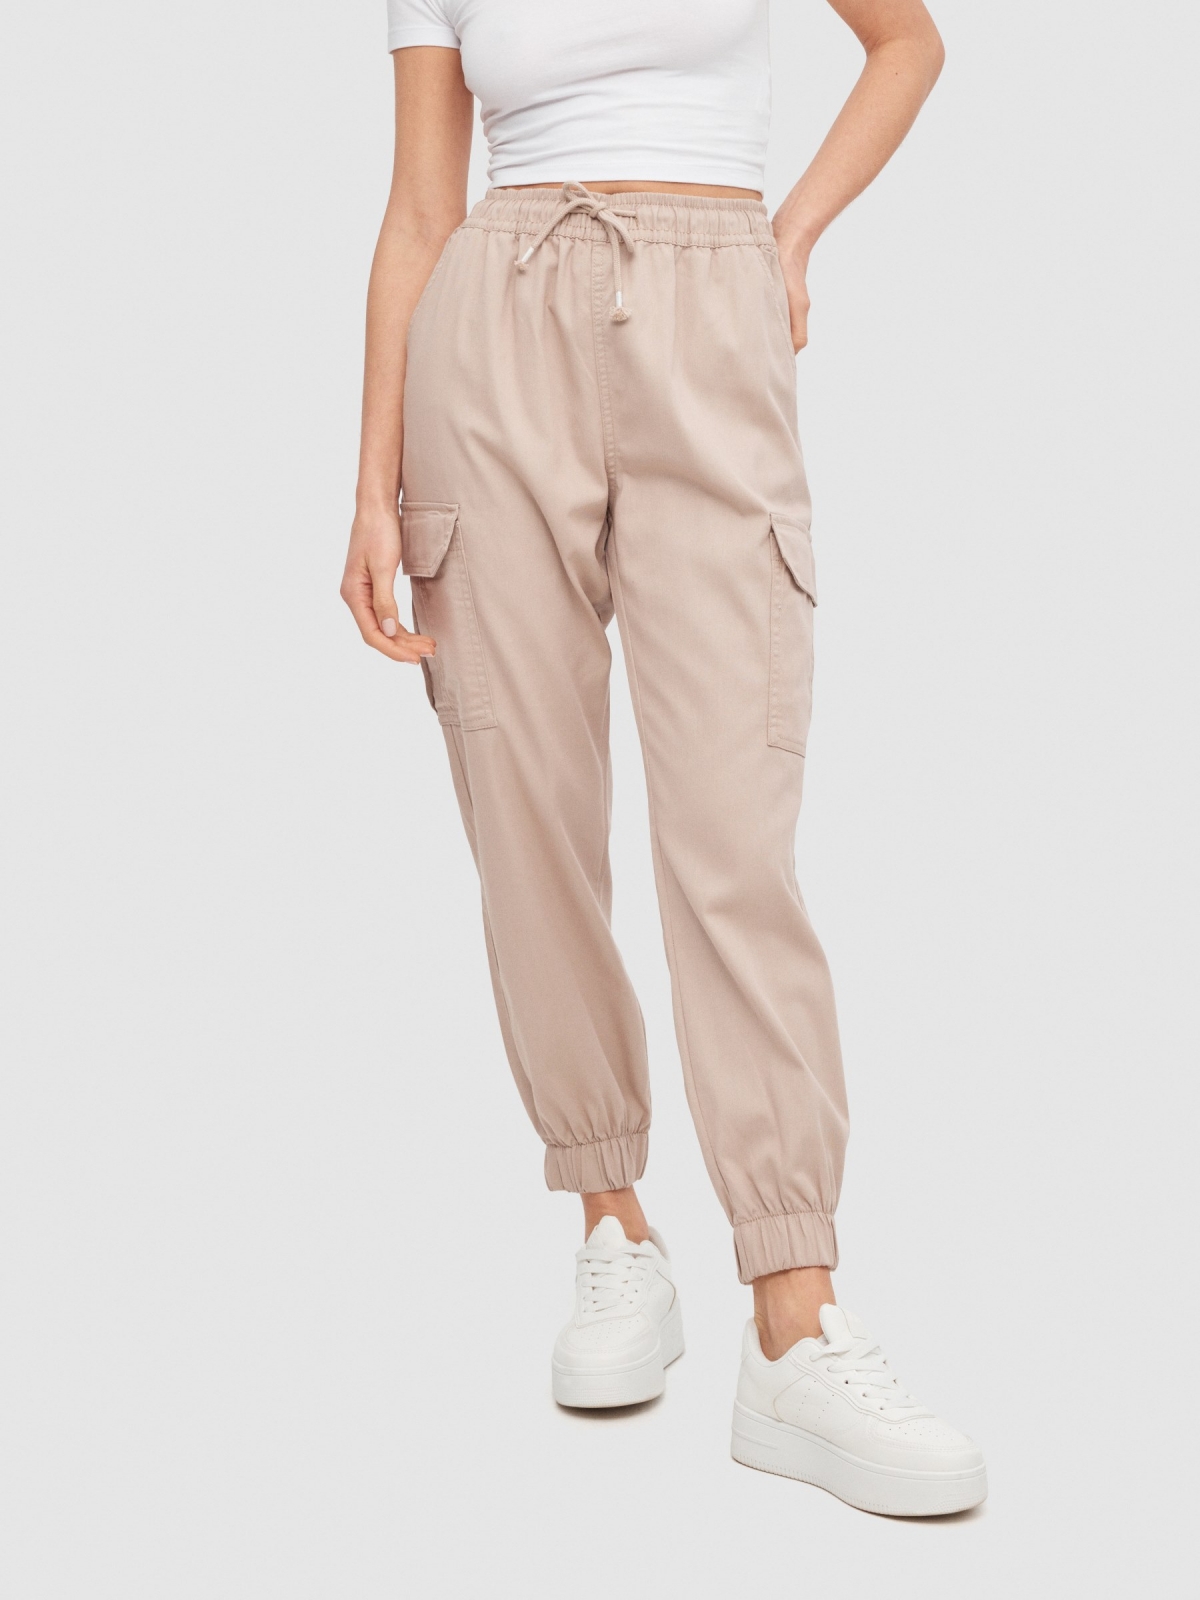 High rise cargo jogger pants sand middle front view